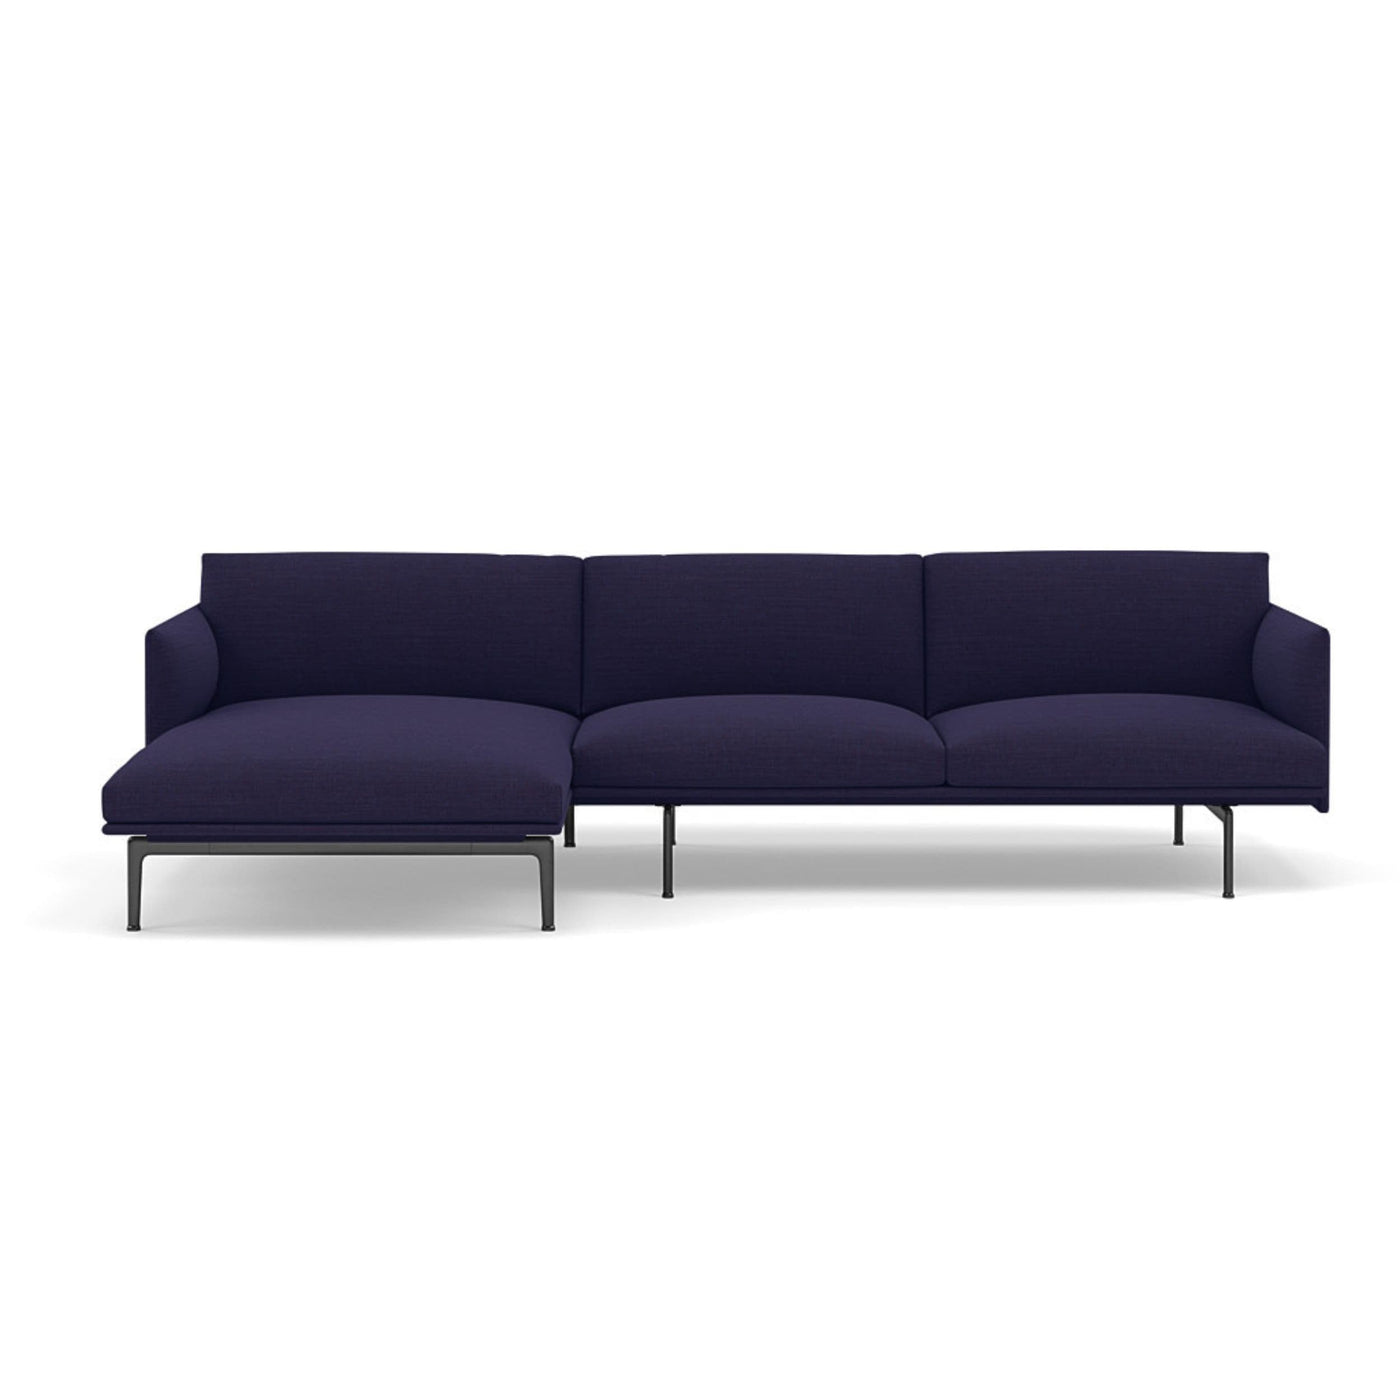 Muuto Outline Chaise Longue sofa in canvas 684. Made to order from someday designs. #colour_canvas-684-blue